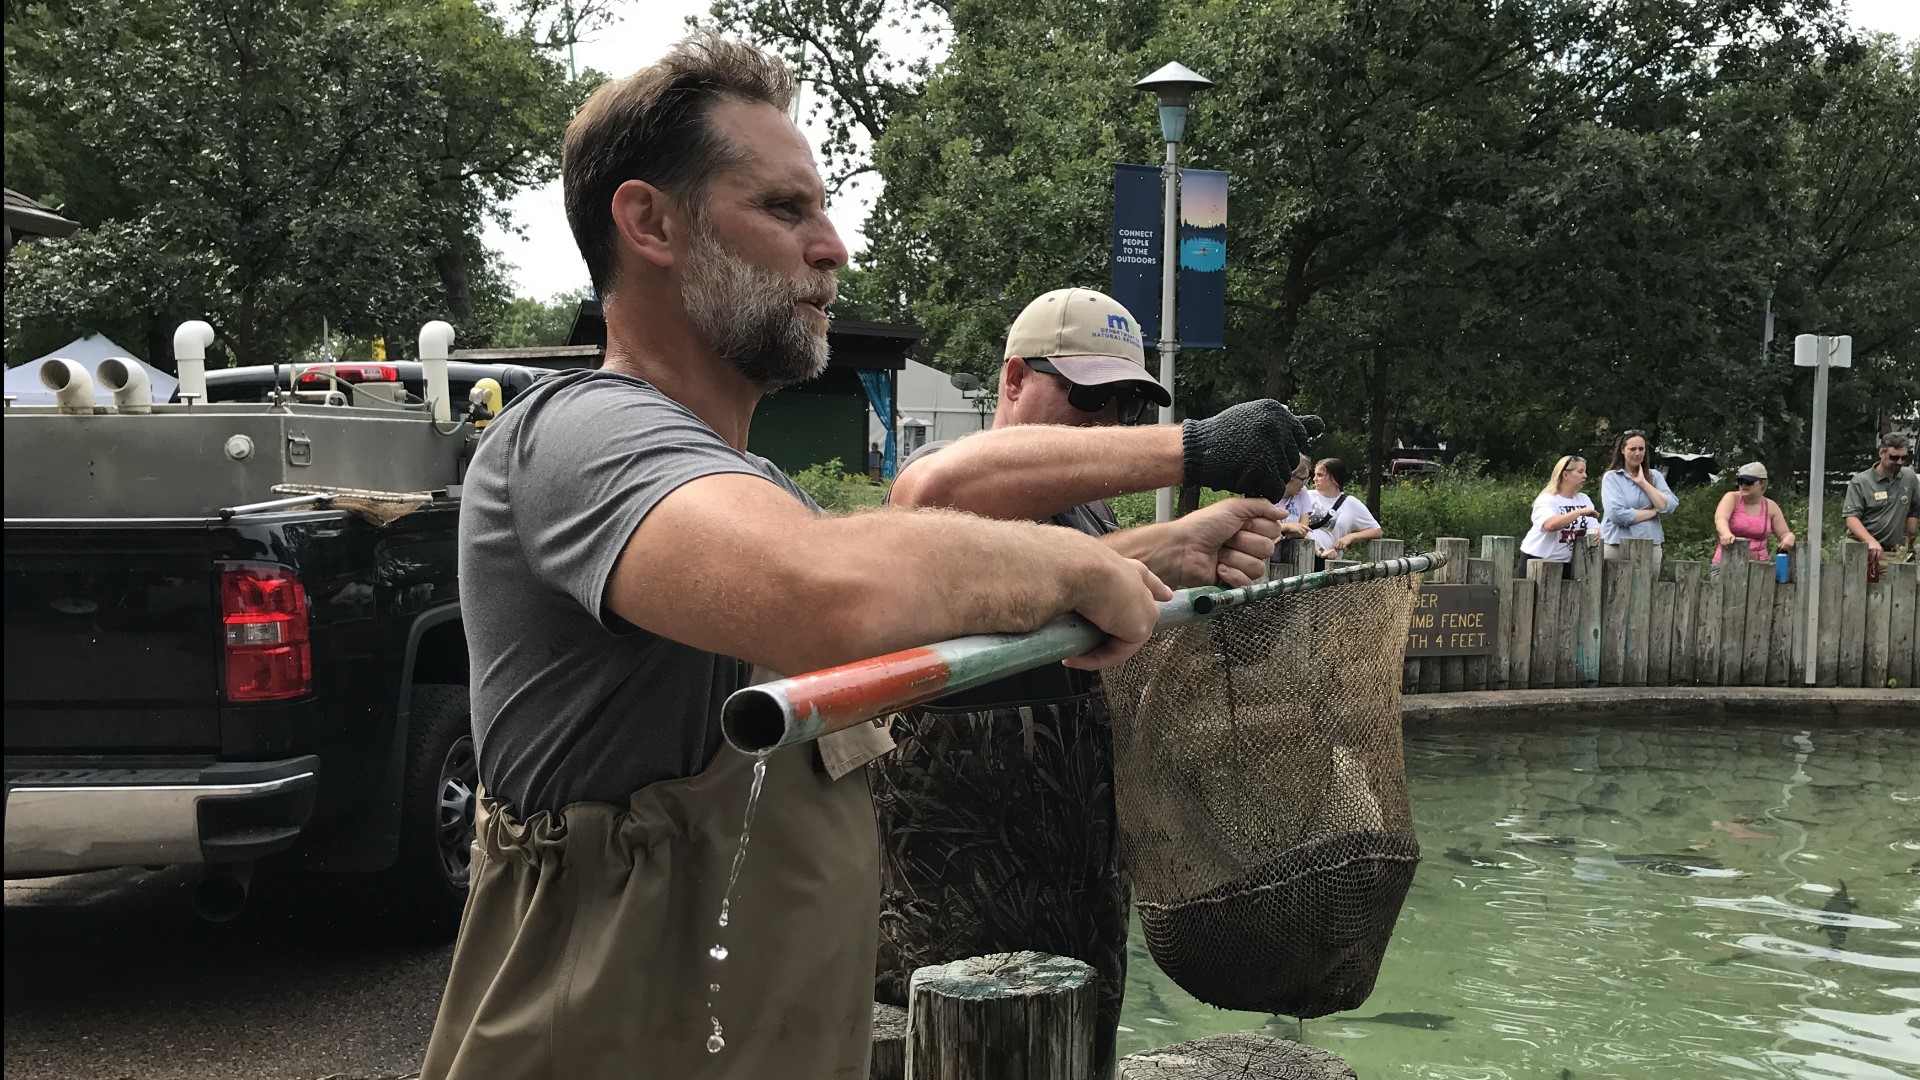 While the Minnesota State Fair can be a energizing, occasionally chaotic setting on its busiest days, the MN DNR fish pond is a great place to get away and relax.